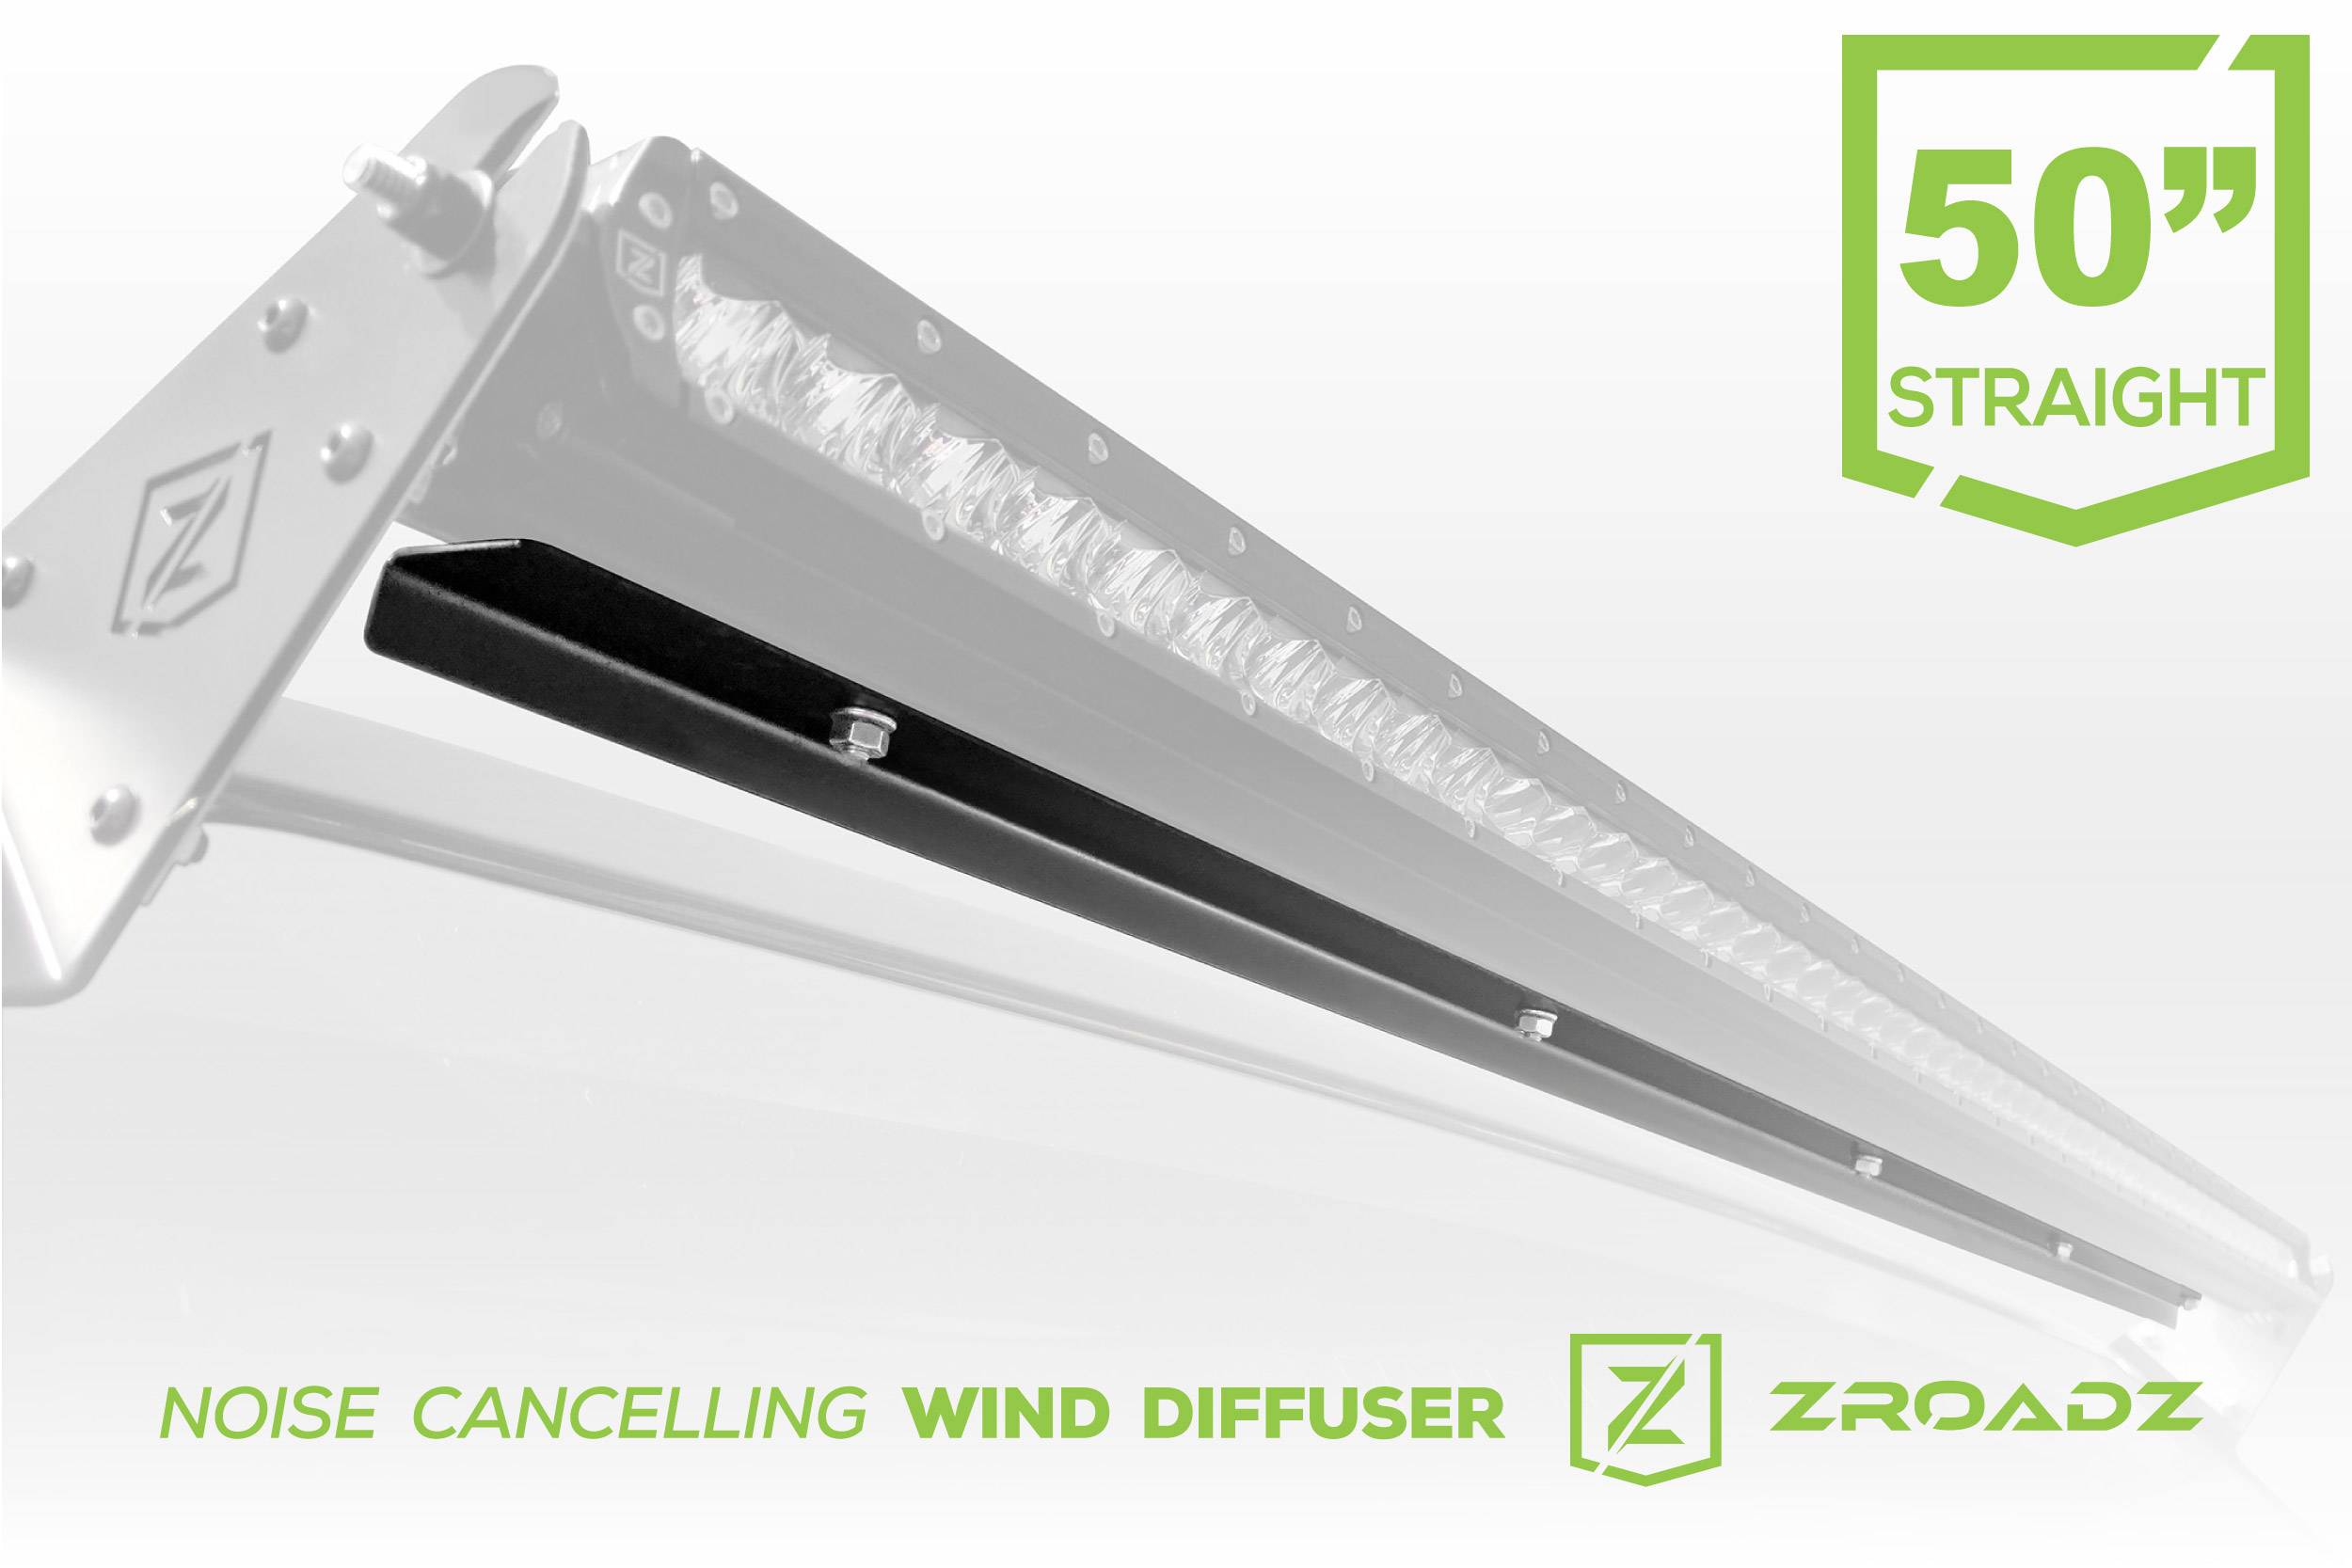 ZROADZ OFF ROAD PRODUCTS - Noise Cancelling Wind Diffuser for 50 Inch Straight Single Row LED Light Bar - Part # Z330051S